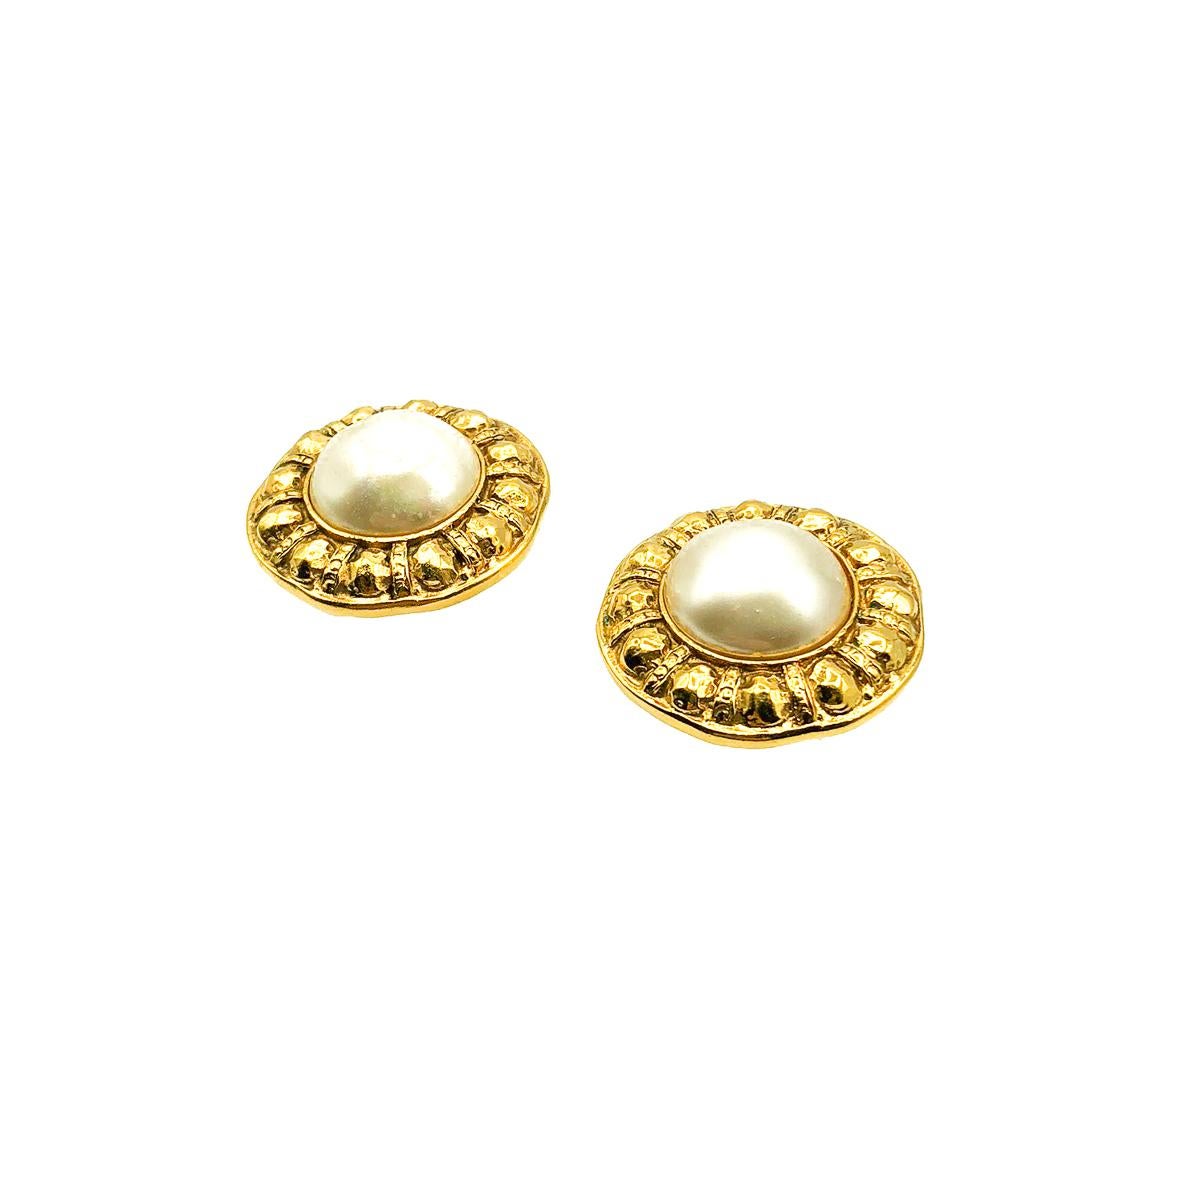 A beautiful statement pair of Vintage Chanel Etruscan Pearl Earrings from the golden era of the 1980s and celebrating one of the most iconic codes of the House; pearls. Crafted in gold plated metal with large sumptuous poured glass or pate de verre